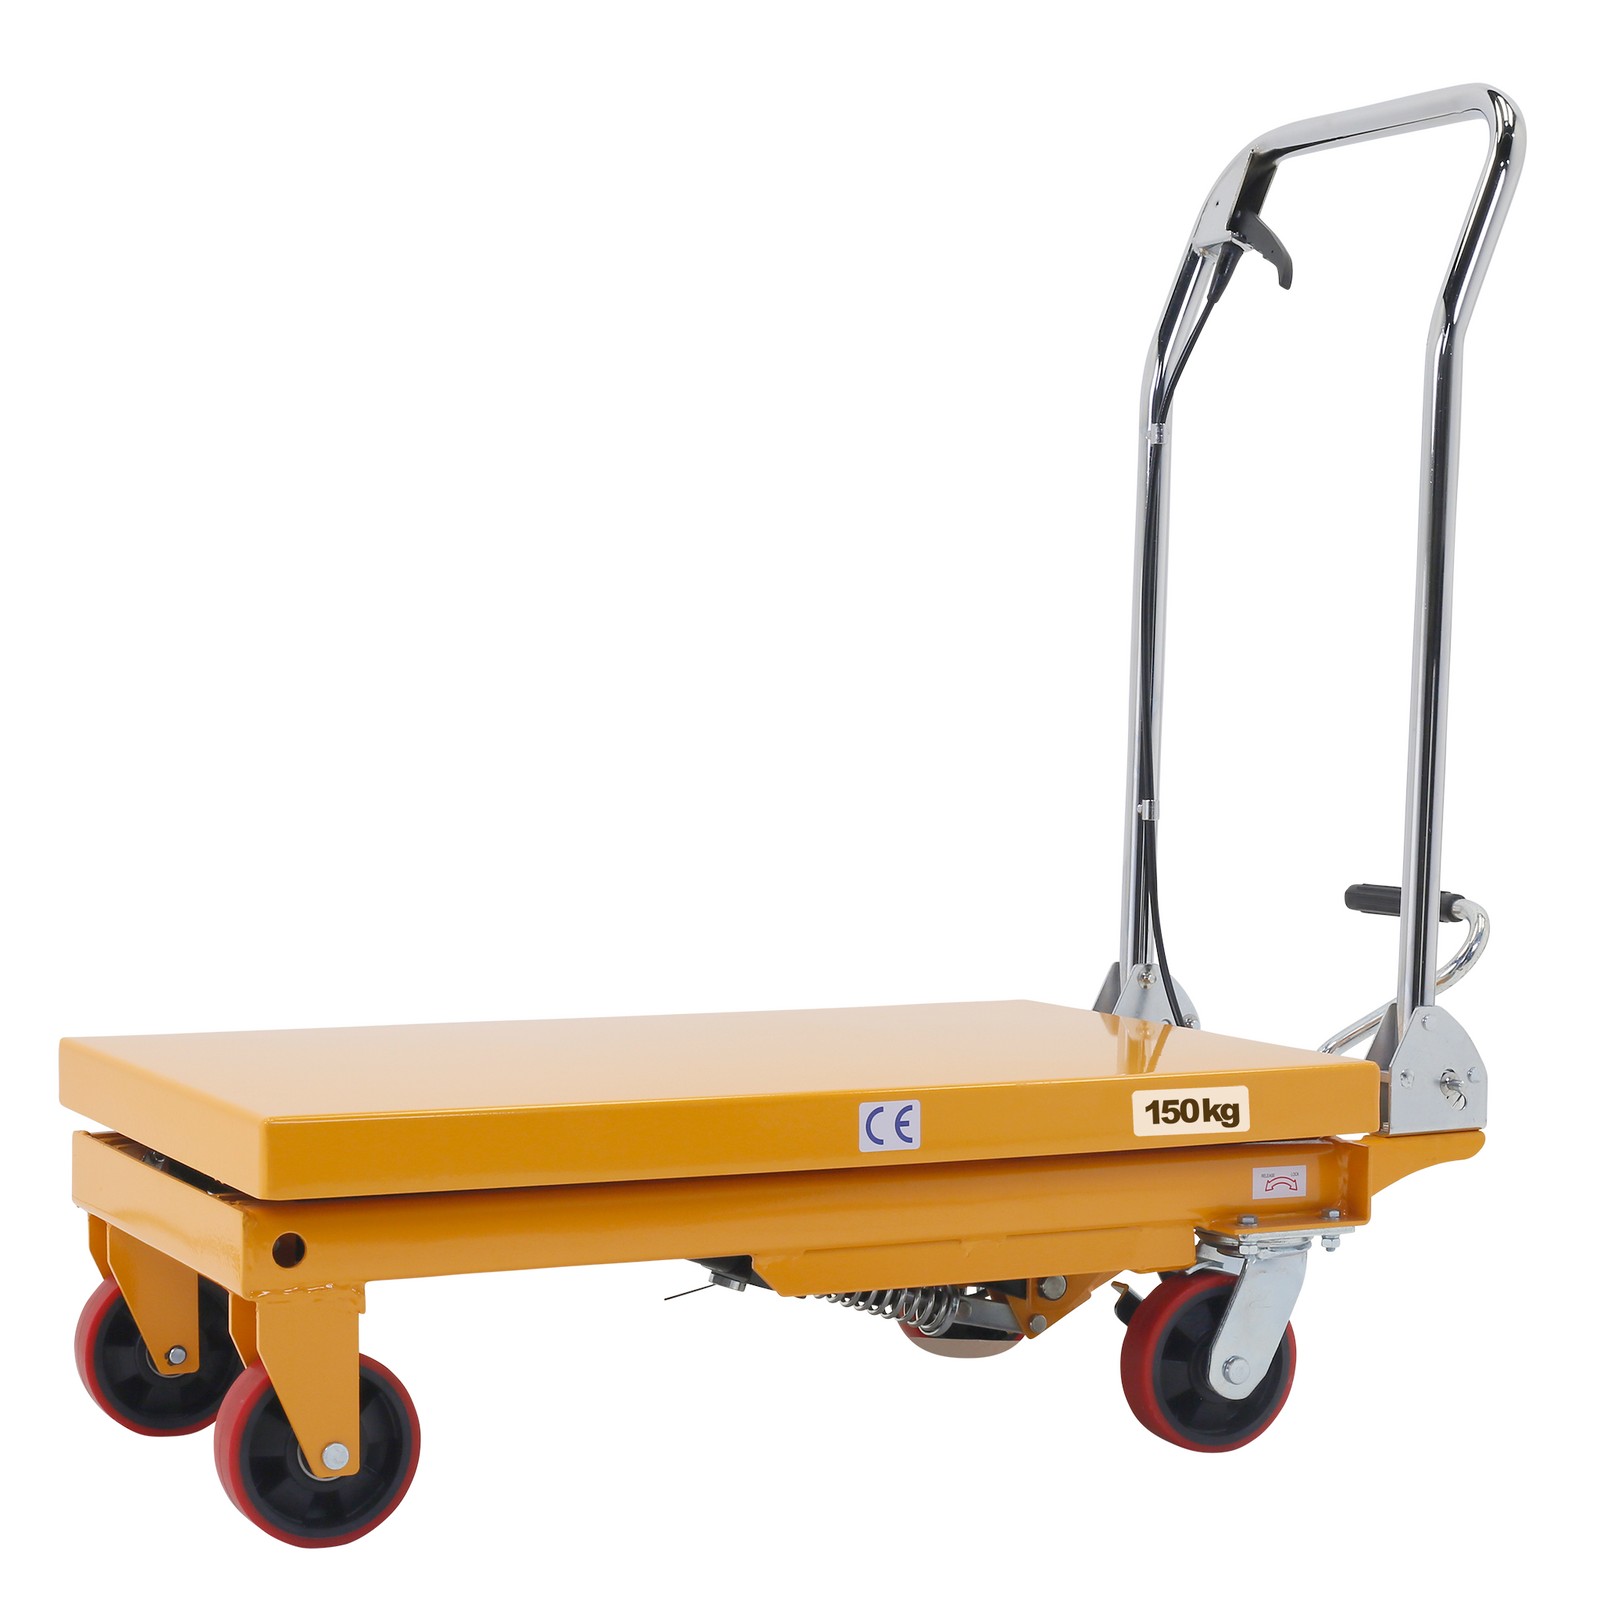 Side view of a JORES TECHNOLOGIES® yellow mobile scissor lift table for 150 Kg. The table is completely collapsed